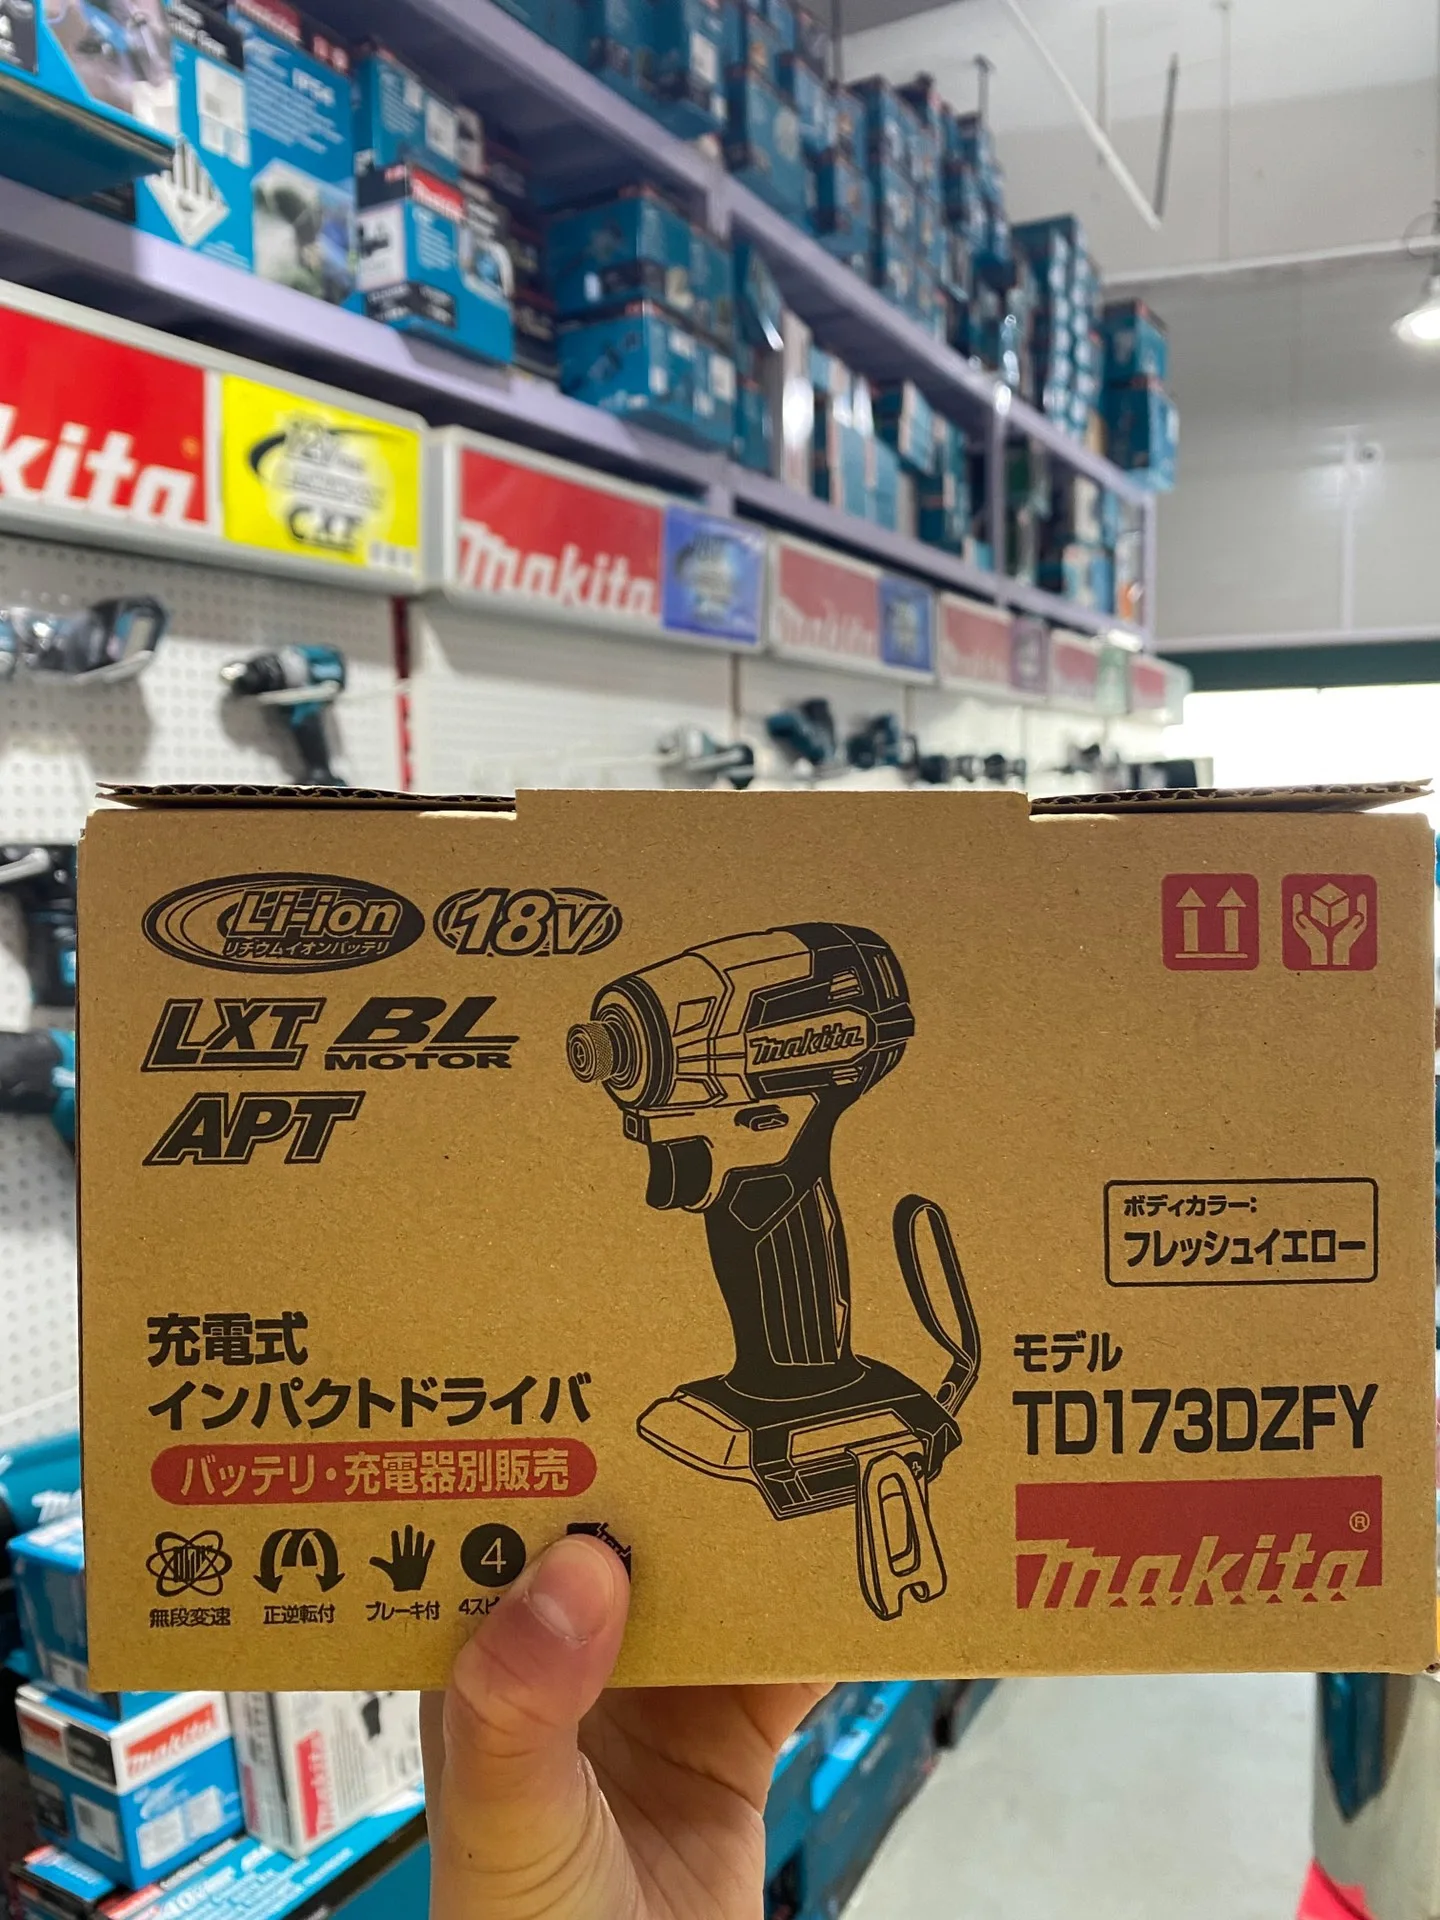 Makita DTD173 Japan  Version Brushless 18v Lithium Impact Driver Power Tool Multi-function Tool  Original and authentic products roco 1 87 ho train model japan mt fuji painting power re460 power switzerland version rtr model boy toy